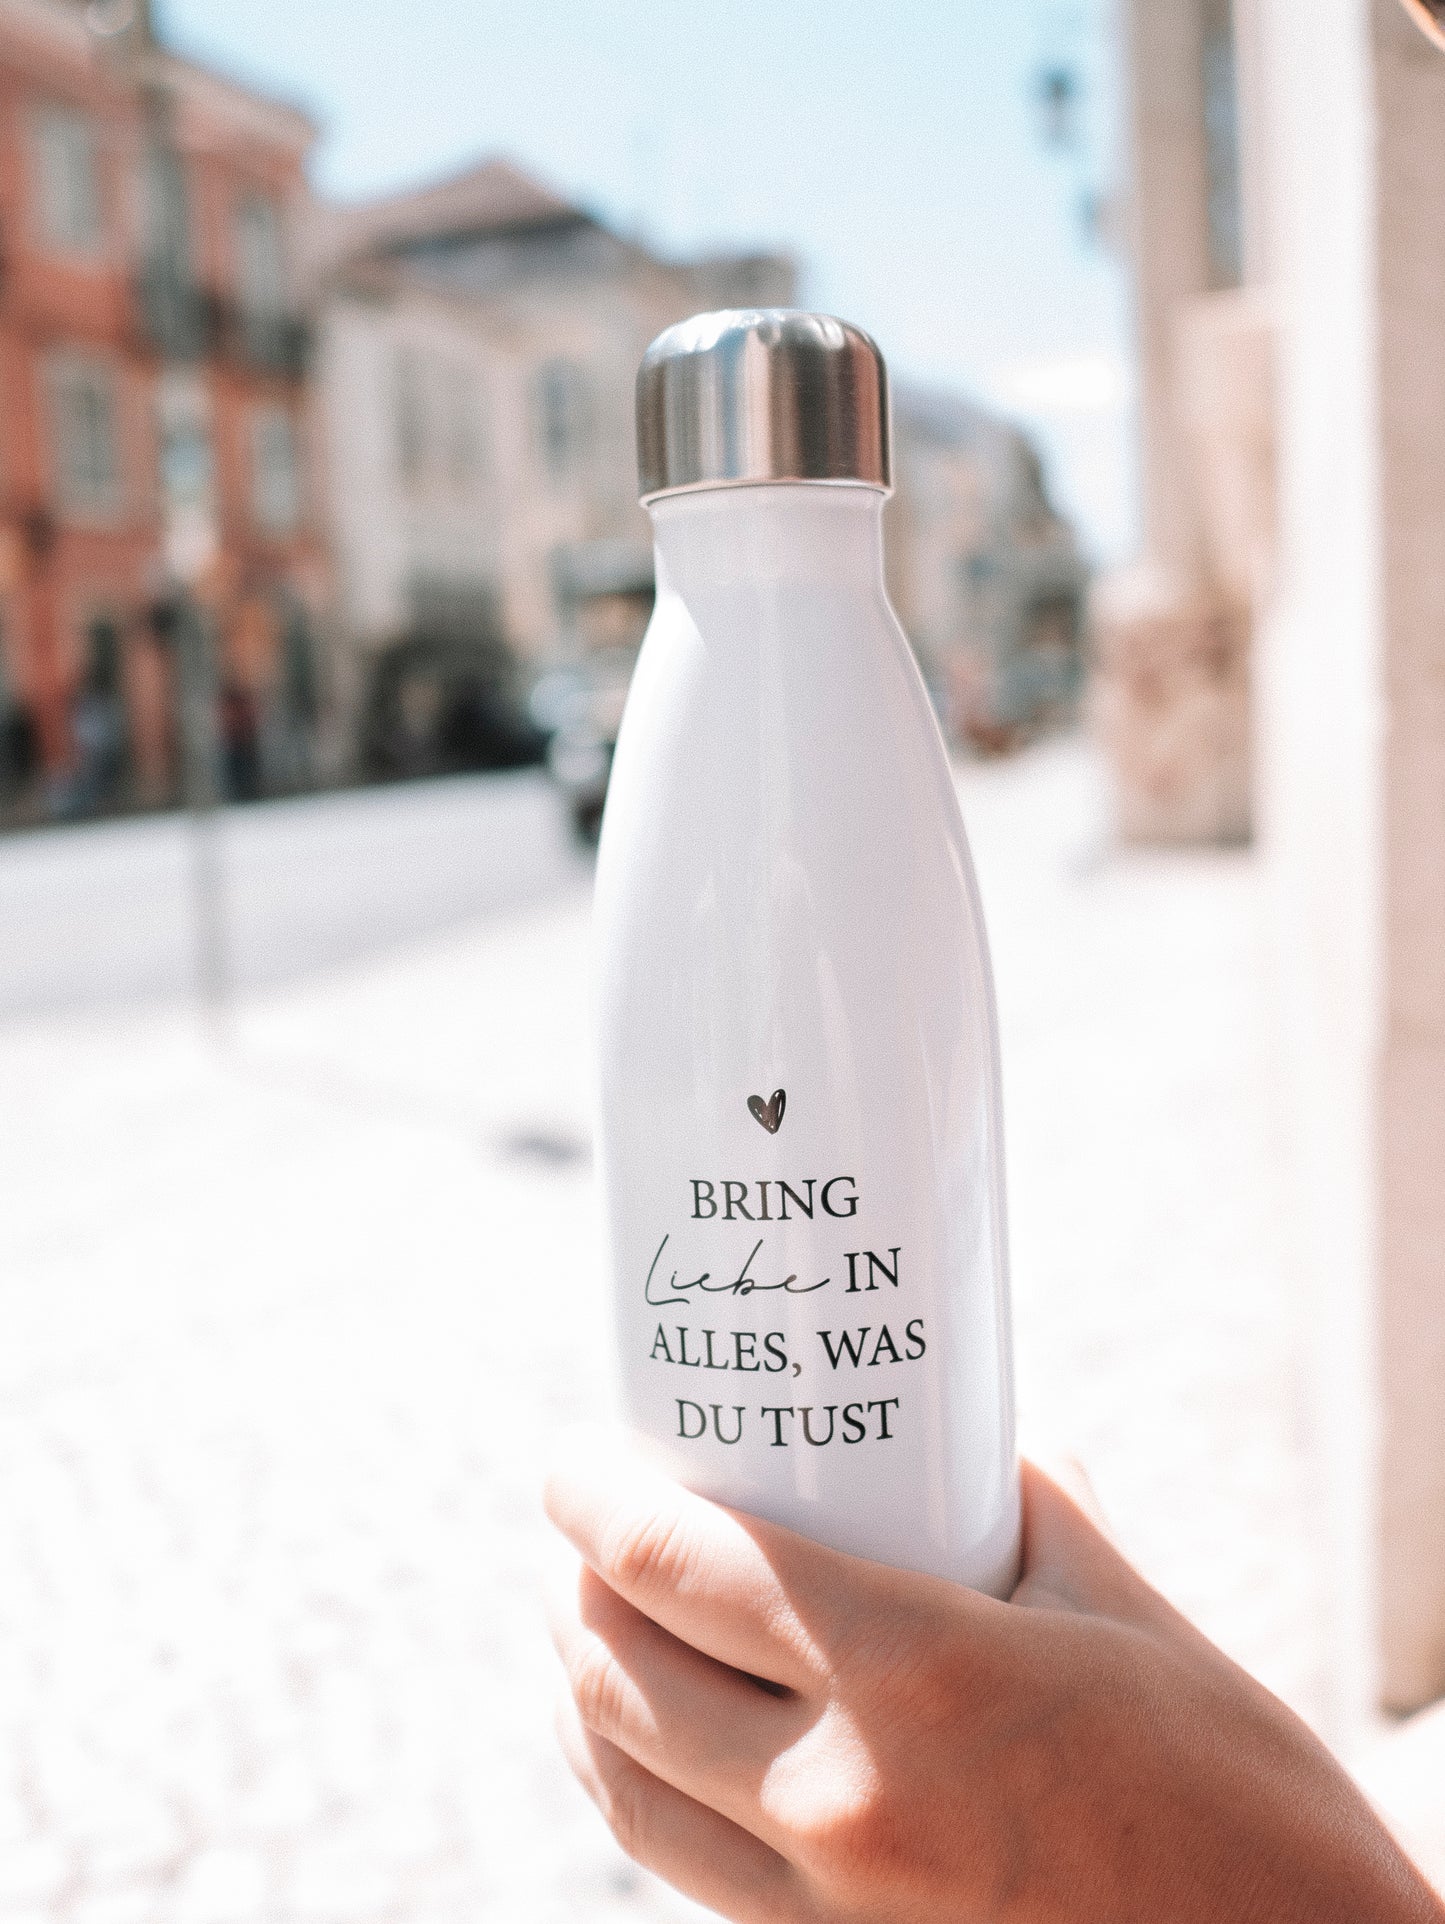 Thermosflasche "Bring Liebe in alles"